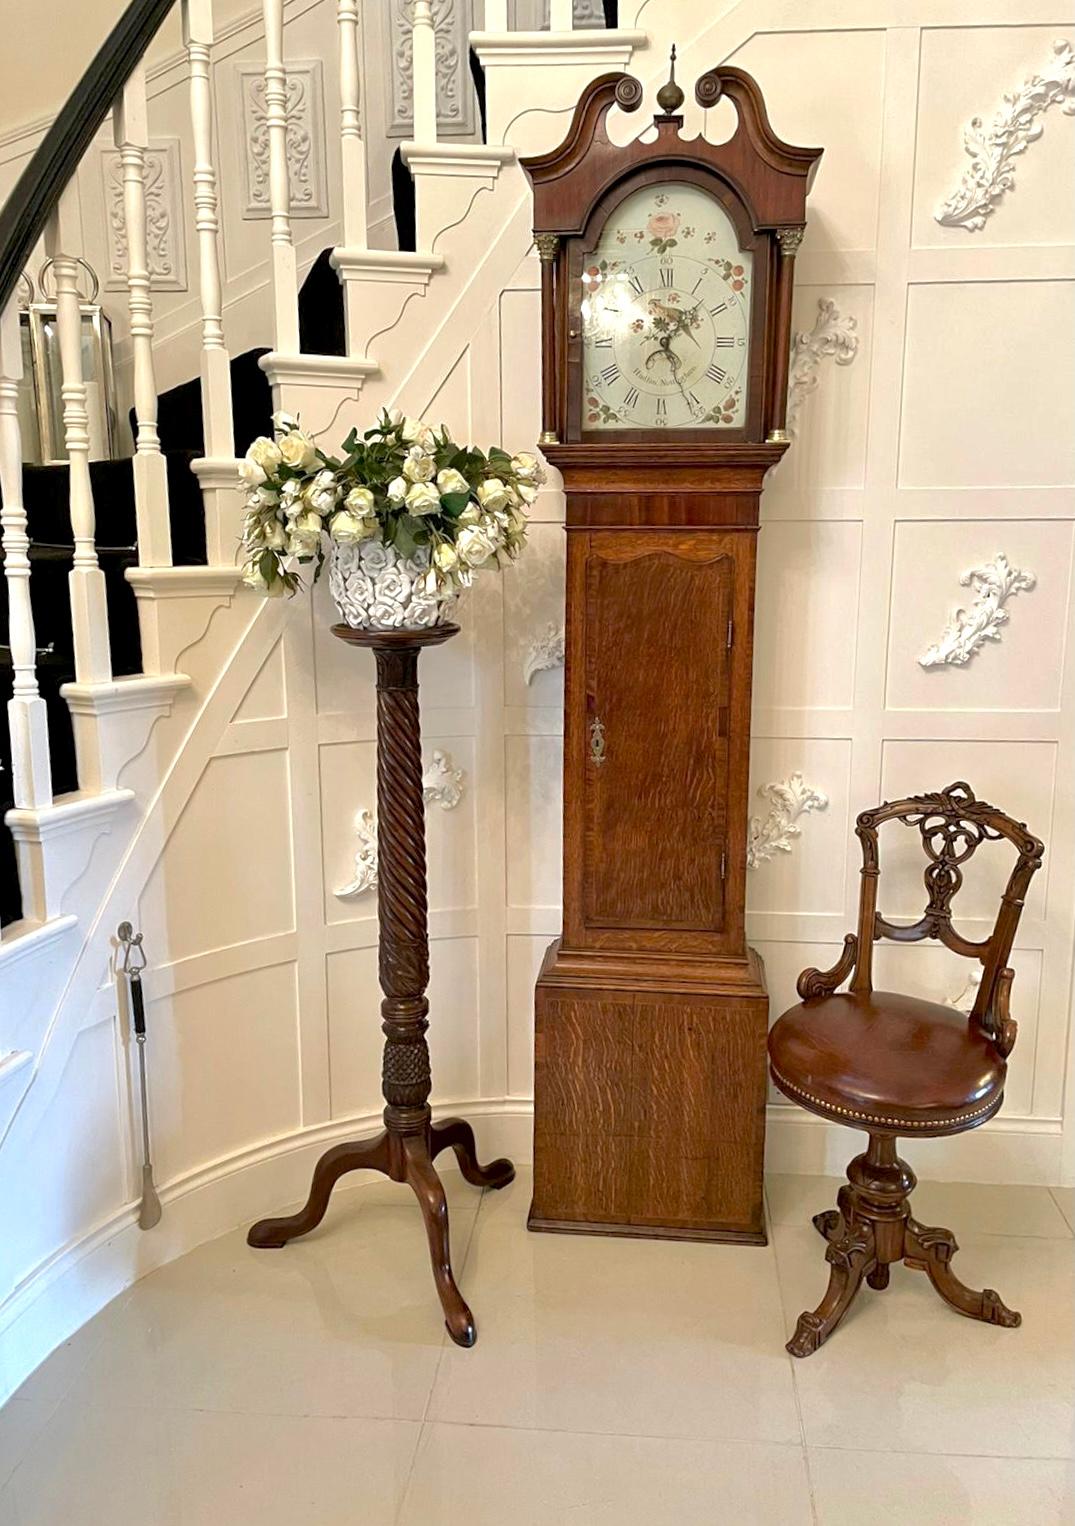 Antique George III mahogany and oak longcase clock by Hudfon of Nottingham having a quality inlaid swan neck pediment and central brass finial above an arched glazed door flanked by turned columns with ornate brass mounts. The arched dial is painted